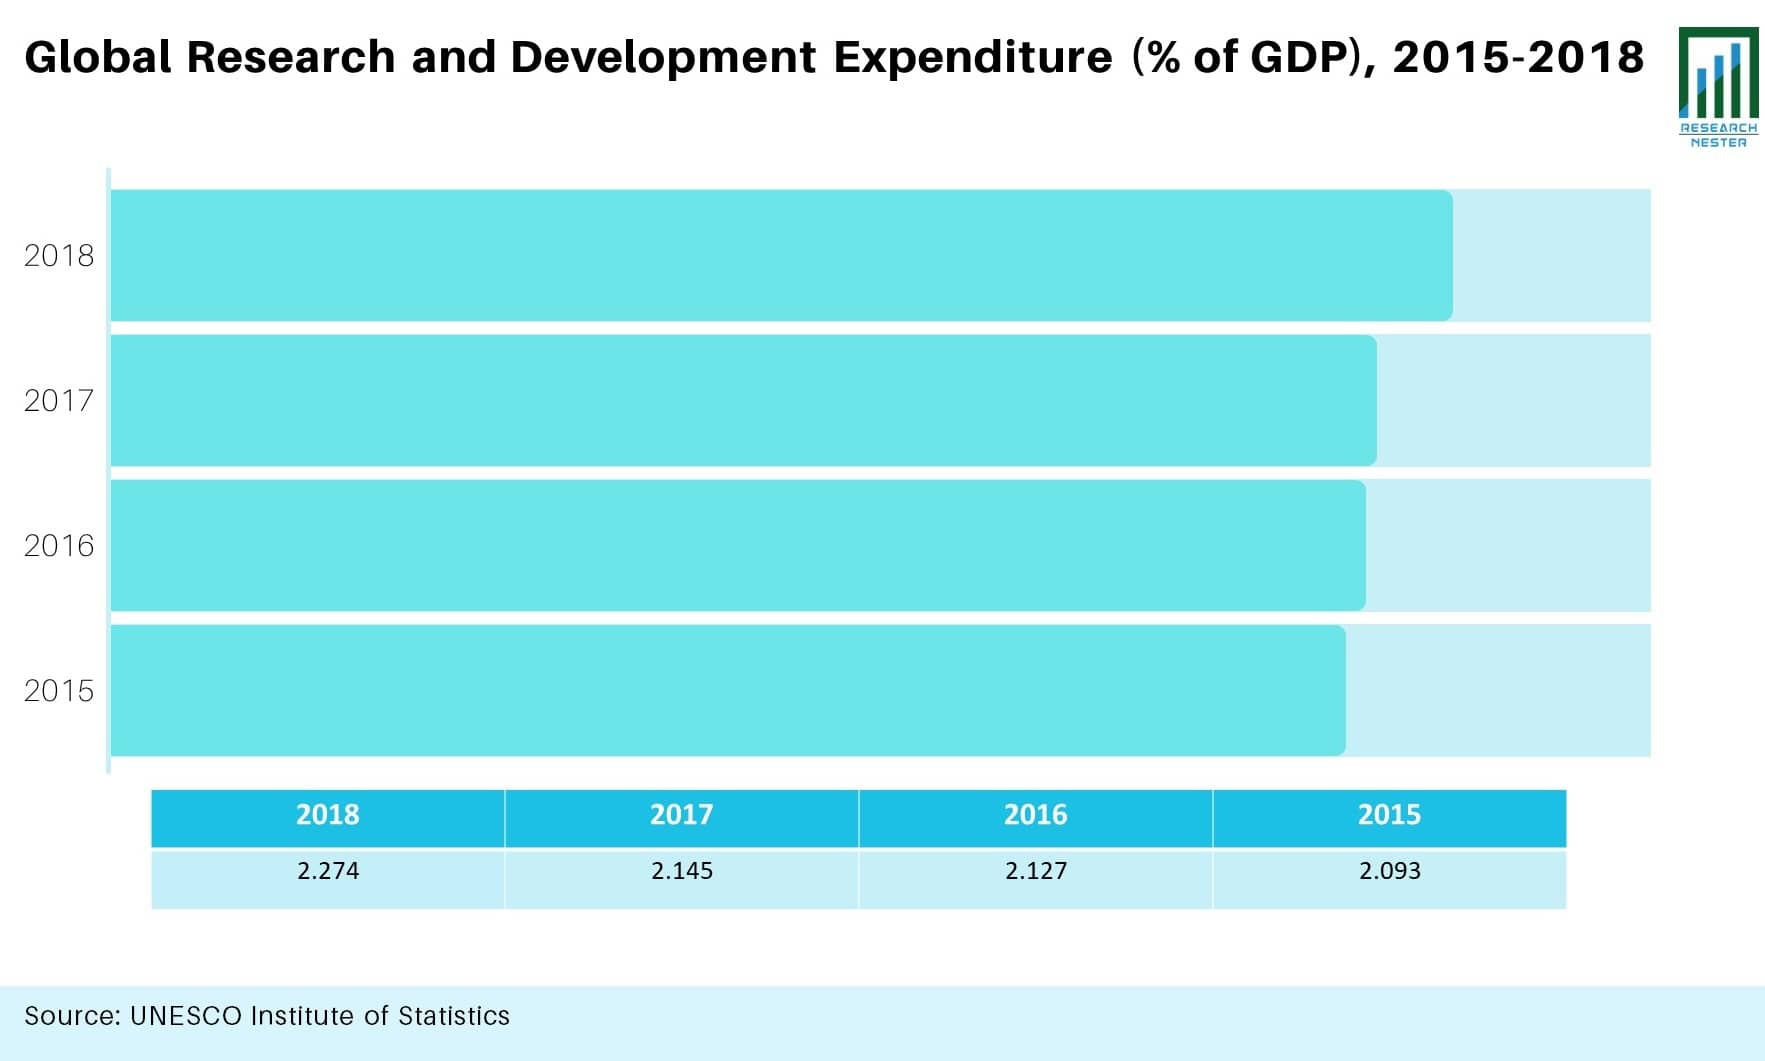 Global Research and Development Expenditure (% of GDP), 2015-2018